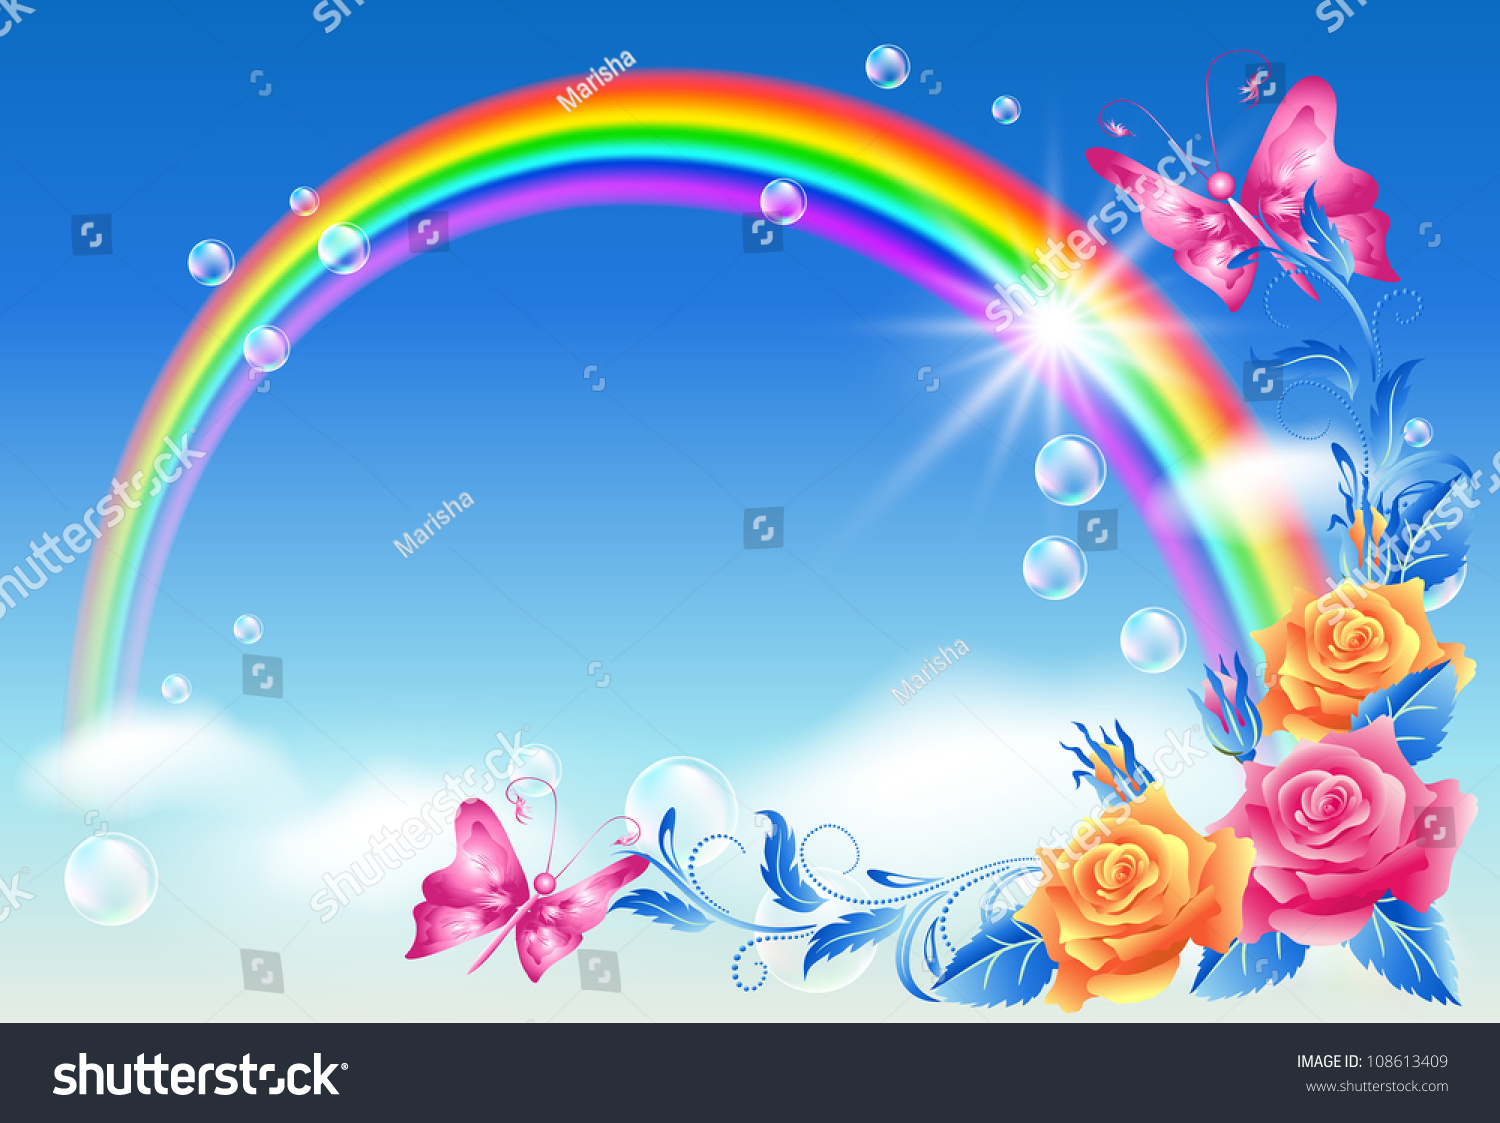 Rainbow, Roses And Butterfly. Raster Version Of Vector ...